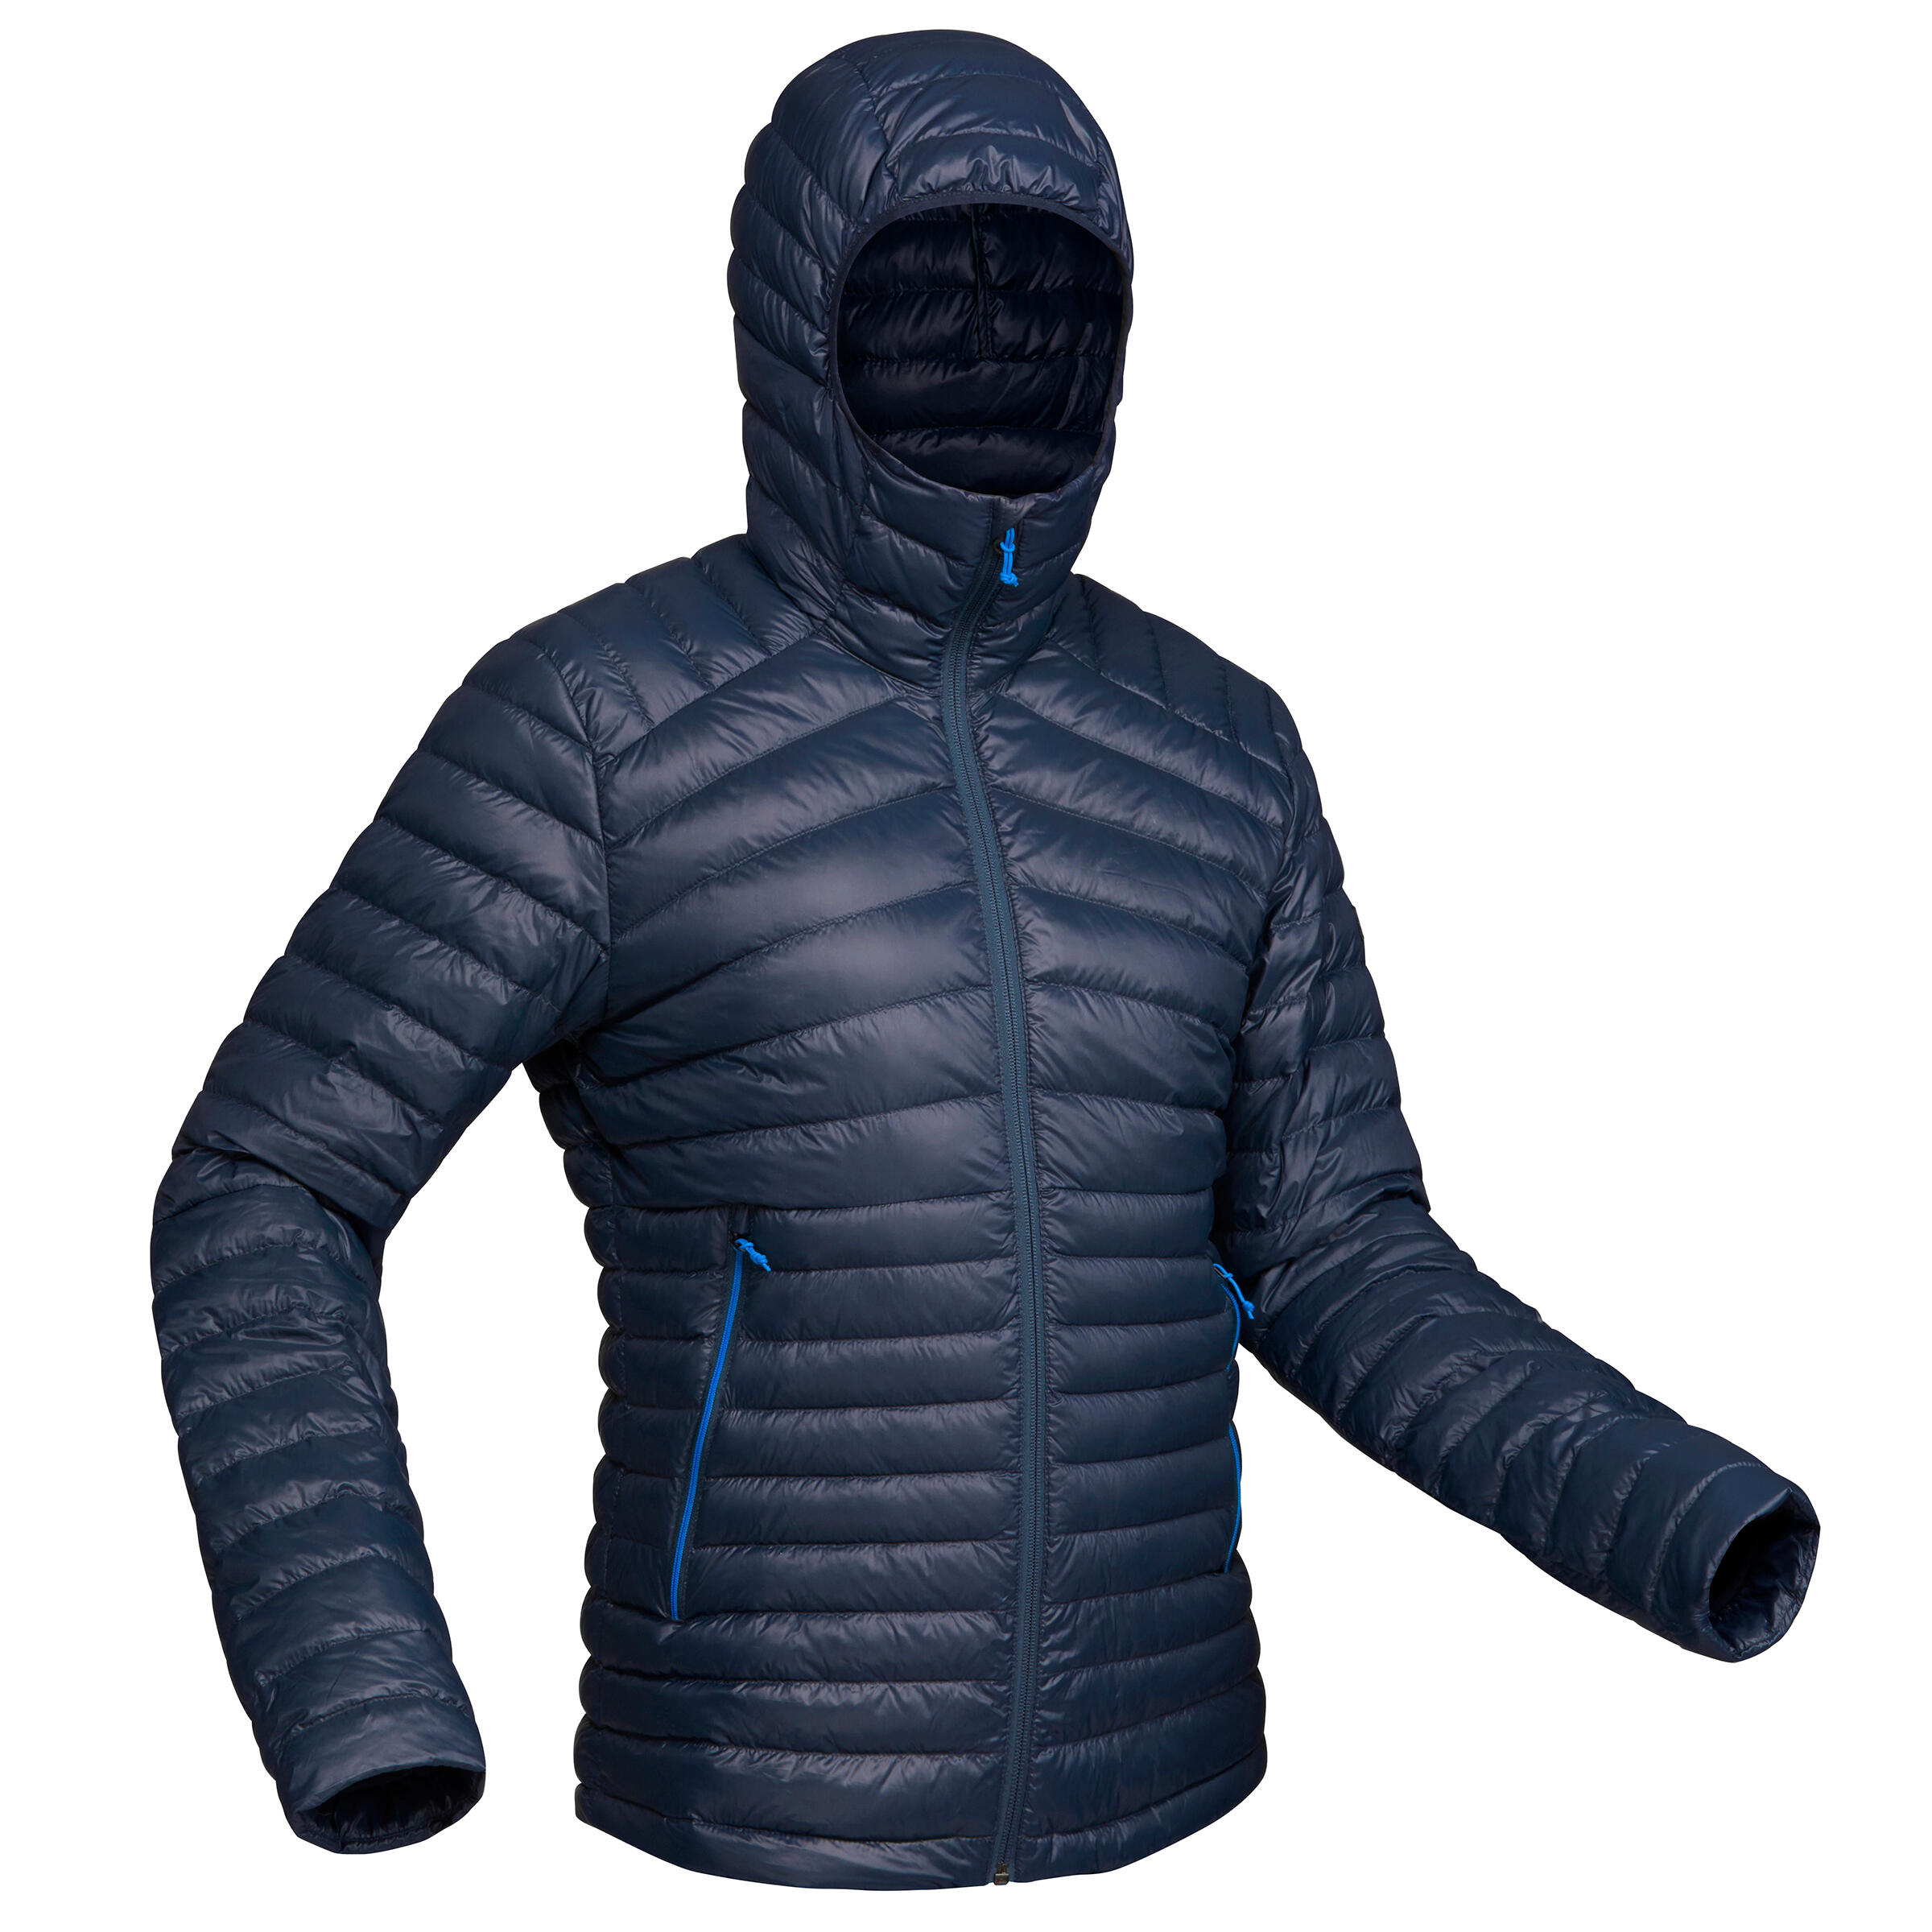 Decathlon Sports India - Men's Synthetic Mountain Trekking Padded Jacket -  MT50 0°C https://bit.ly/3iQHKII Our designers developed this padded jacket  for your mountain outings in good weather.. This comfortable padded jacket  is